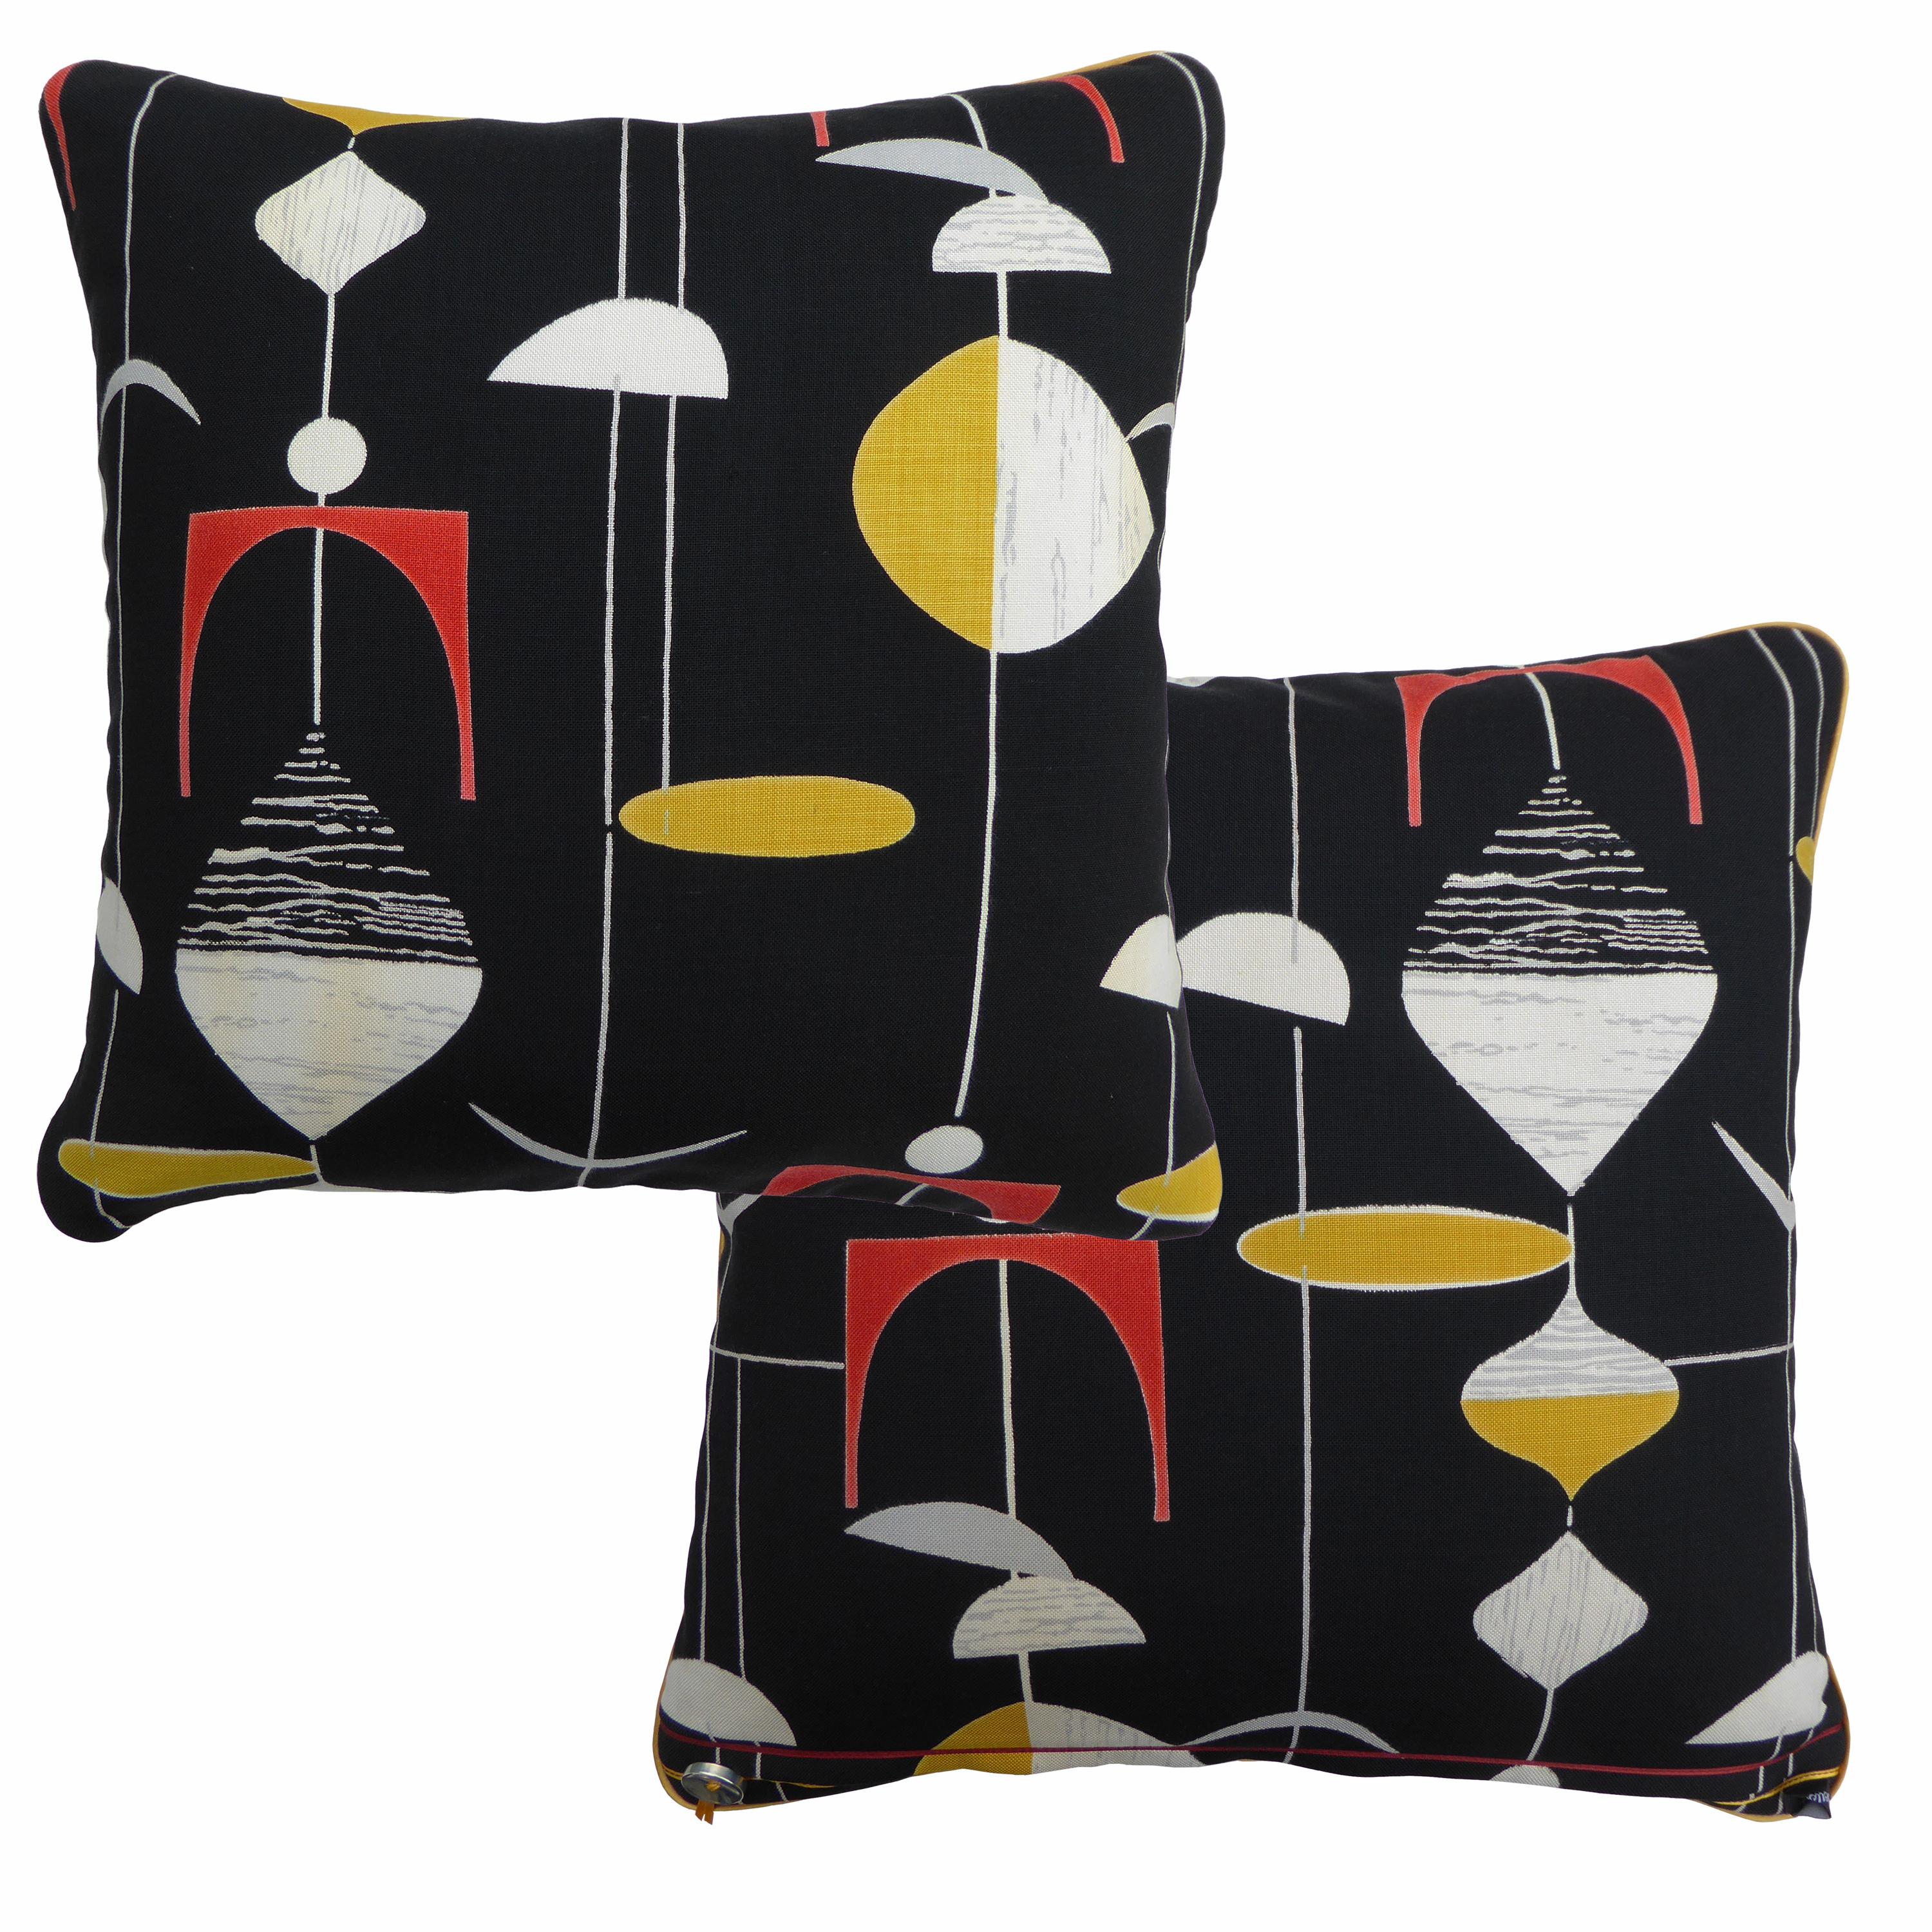 Mobiles
circa - 1950
British bespoke made cushion created using original mid-century vintage fabric designed by British designer Marian Mahler. The pattern, often called “Mobiles” was manufactured by the British company David Whitehead and Sons Ltd.